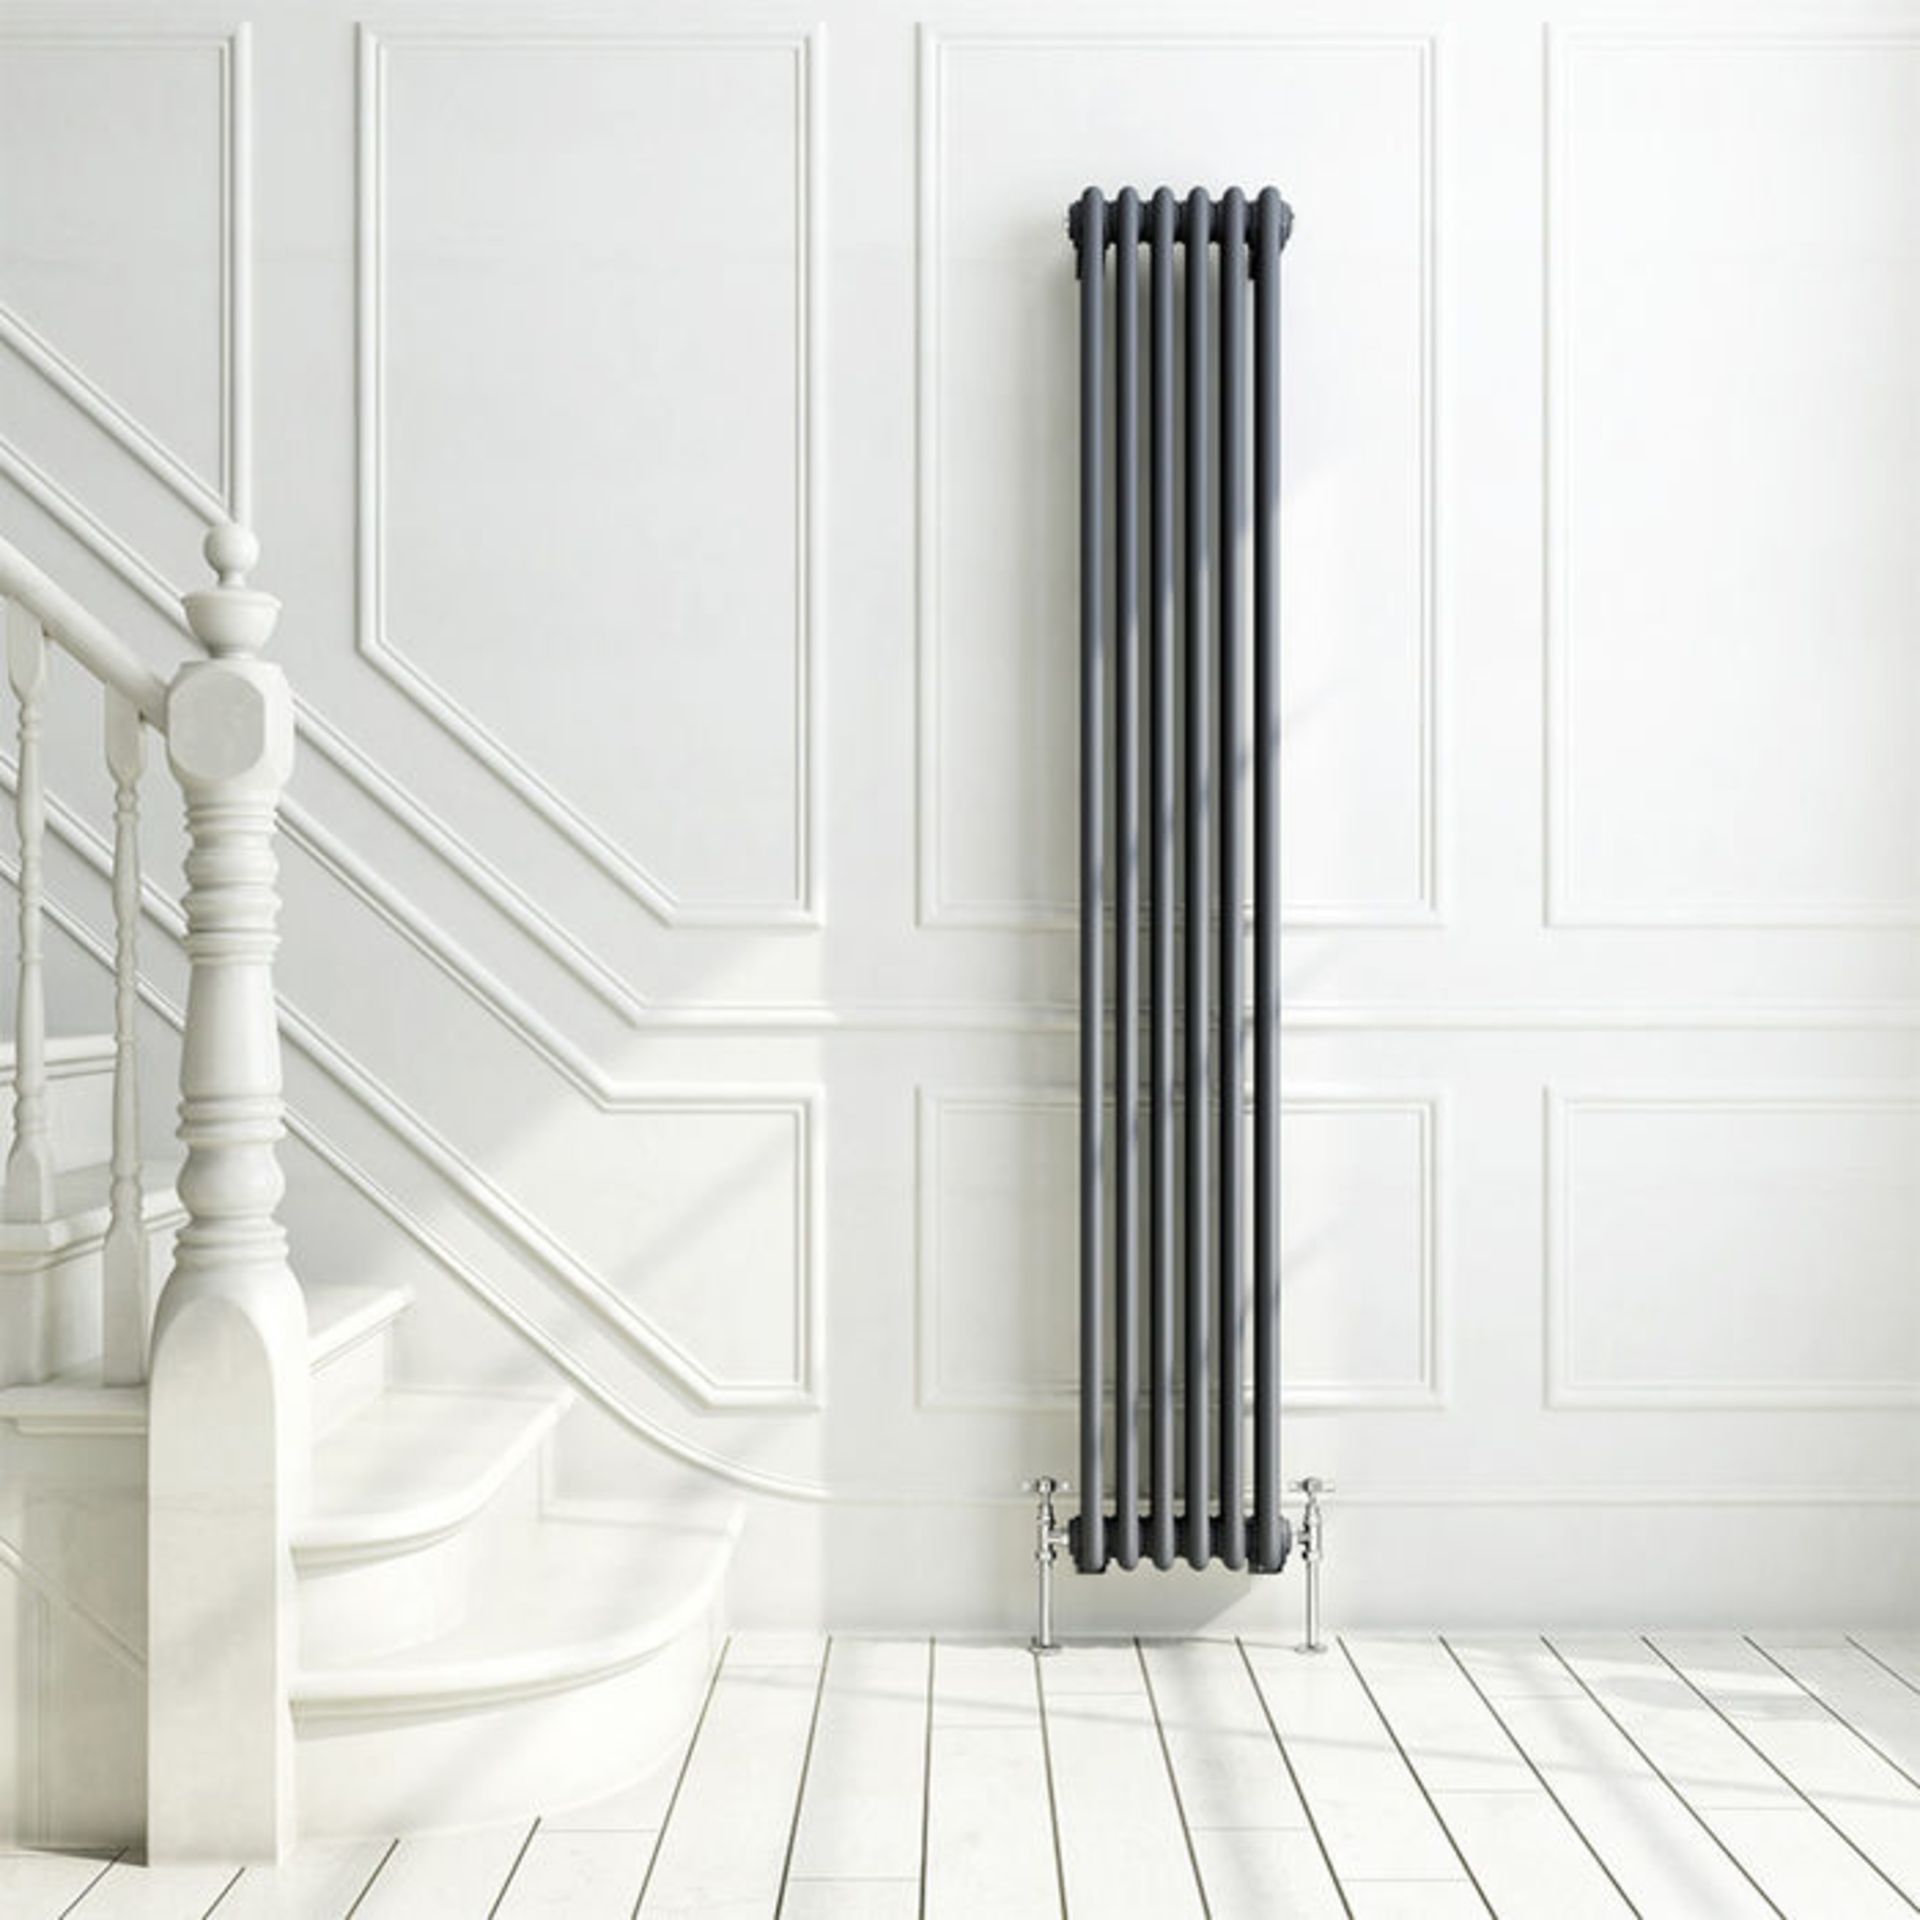 (DK128) 1800x290mm Anthracite Triple Panel Vertical Colosseum Traditional Radiator. RRP £430.99. - Image 4 of 4